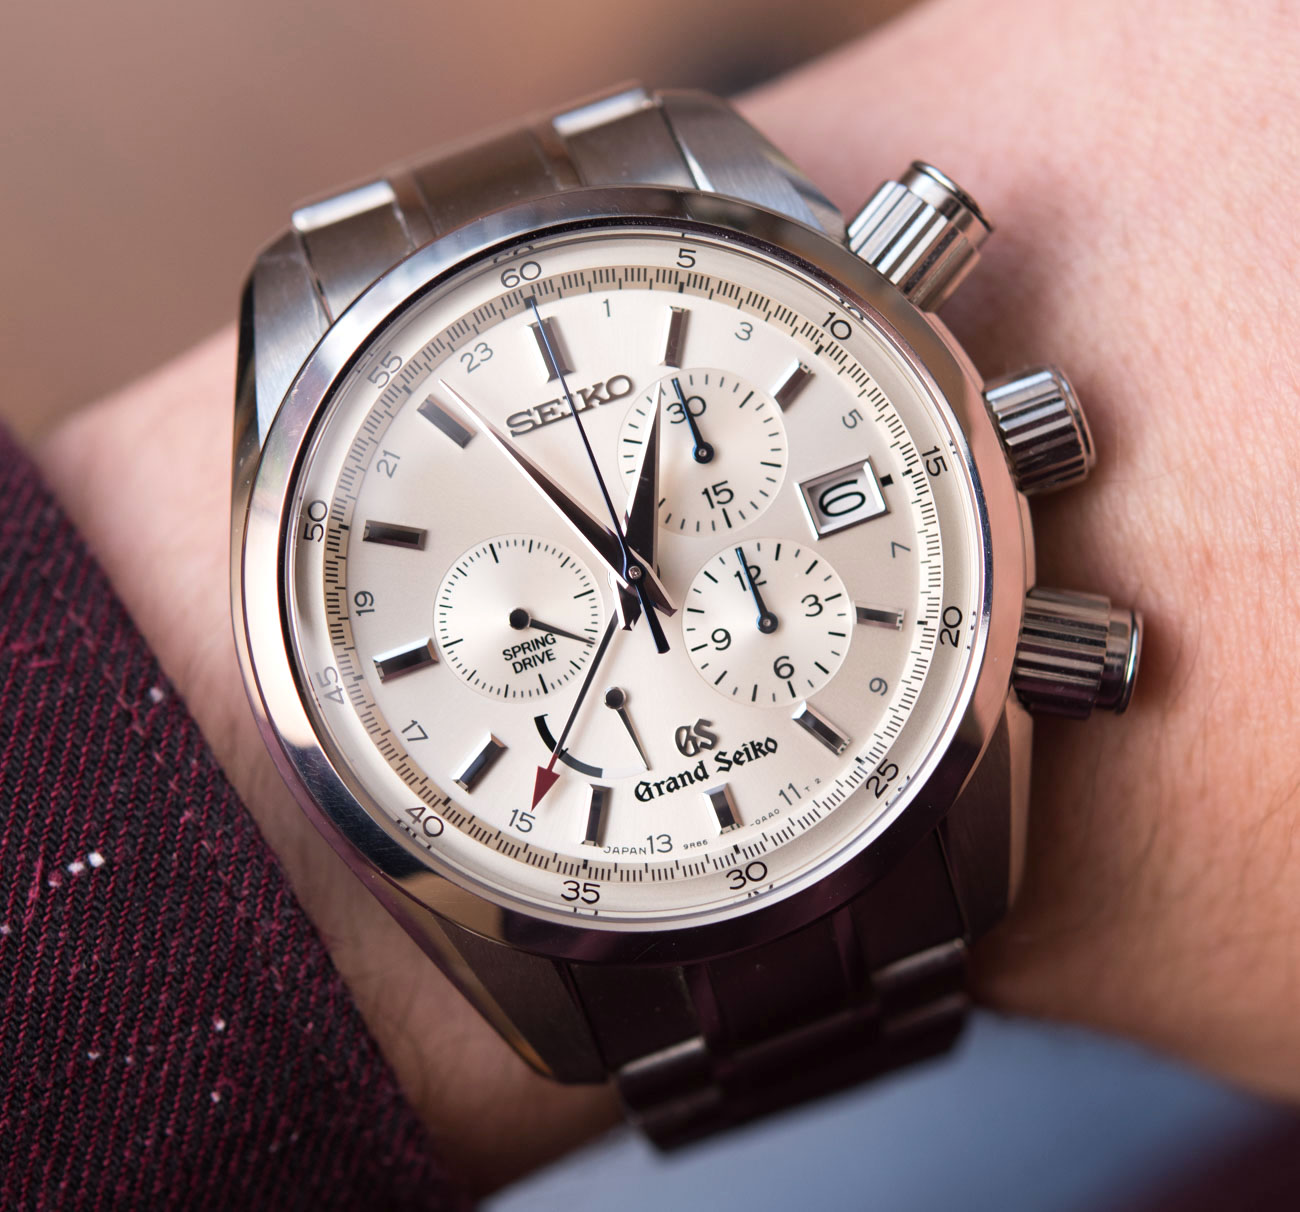 Grand Seiko Spring Drive Chronograph SBGC001 Watch Review | Page 3 